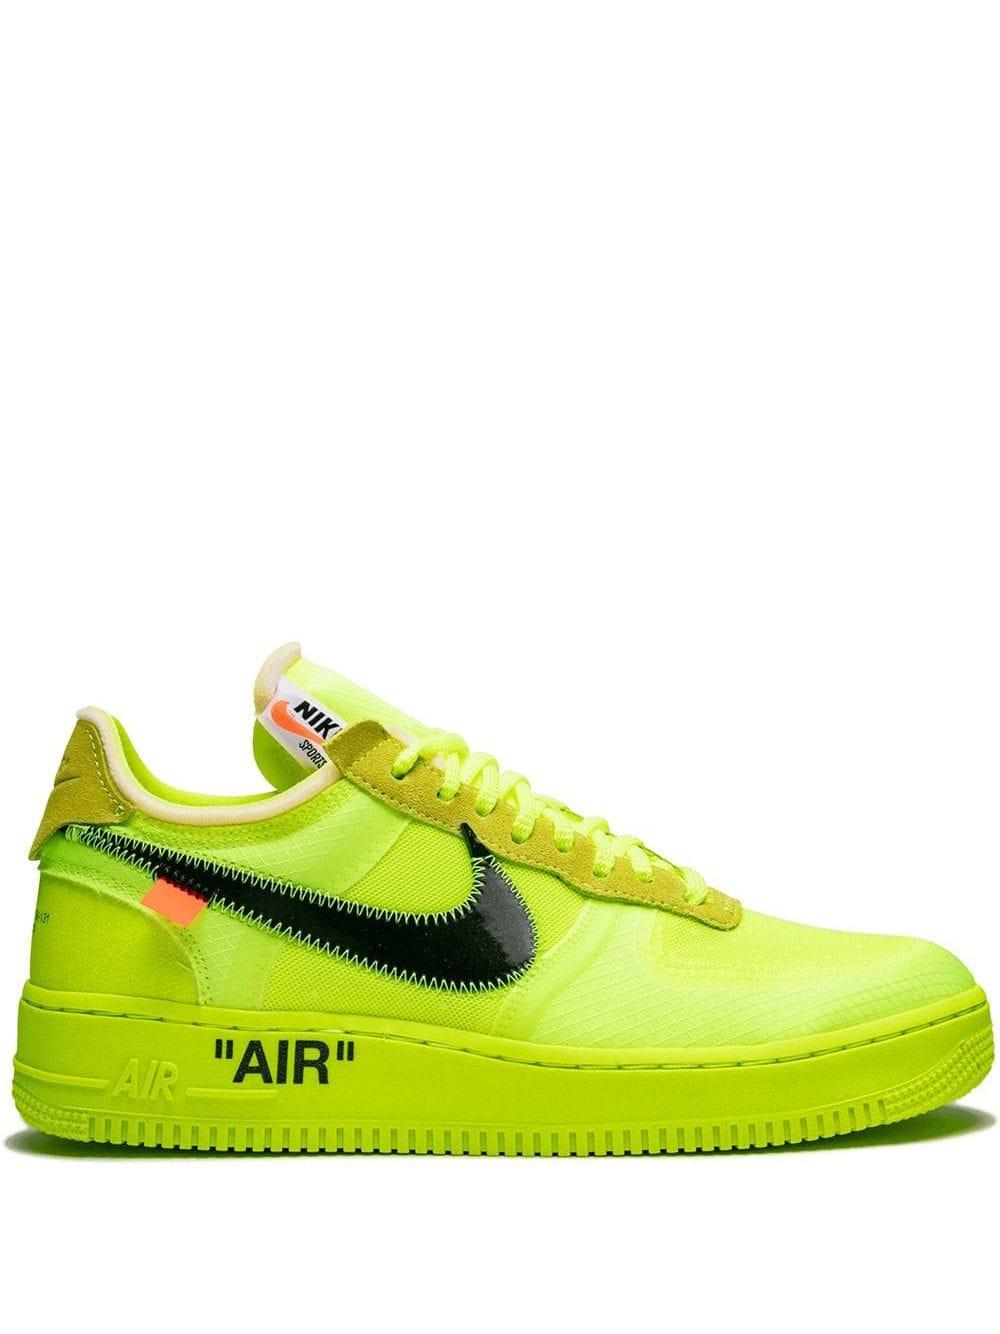 NIKE X OFF-WHITE The 10: Air Force 1 Low 'off-white Volt' Shoes in Green  (Yellow) - Save 50% - Lyst